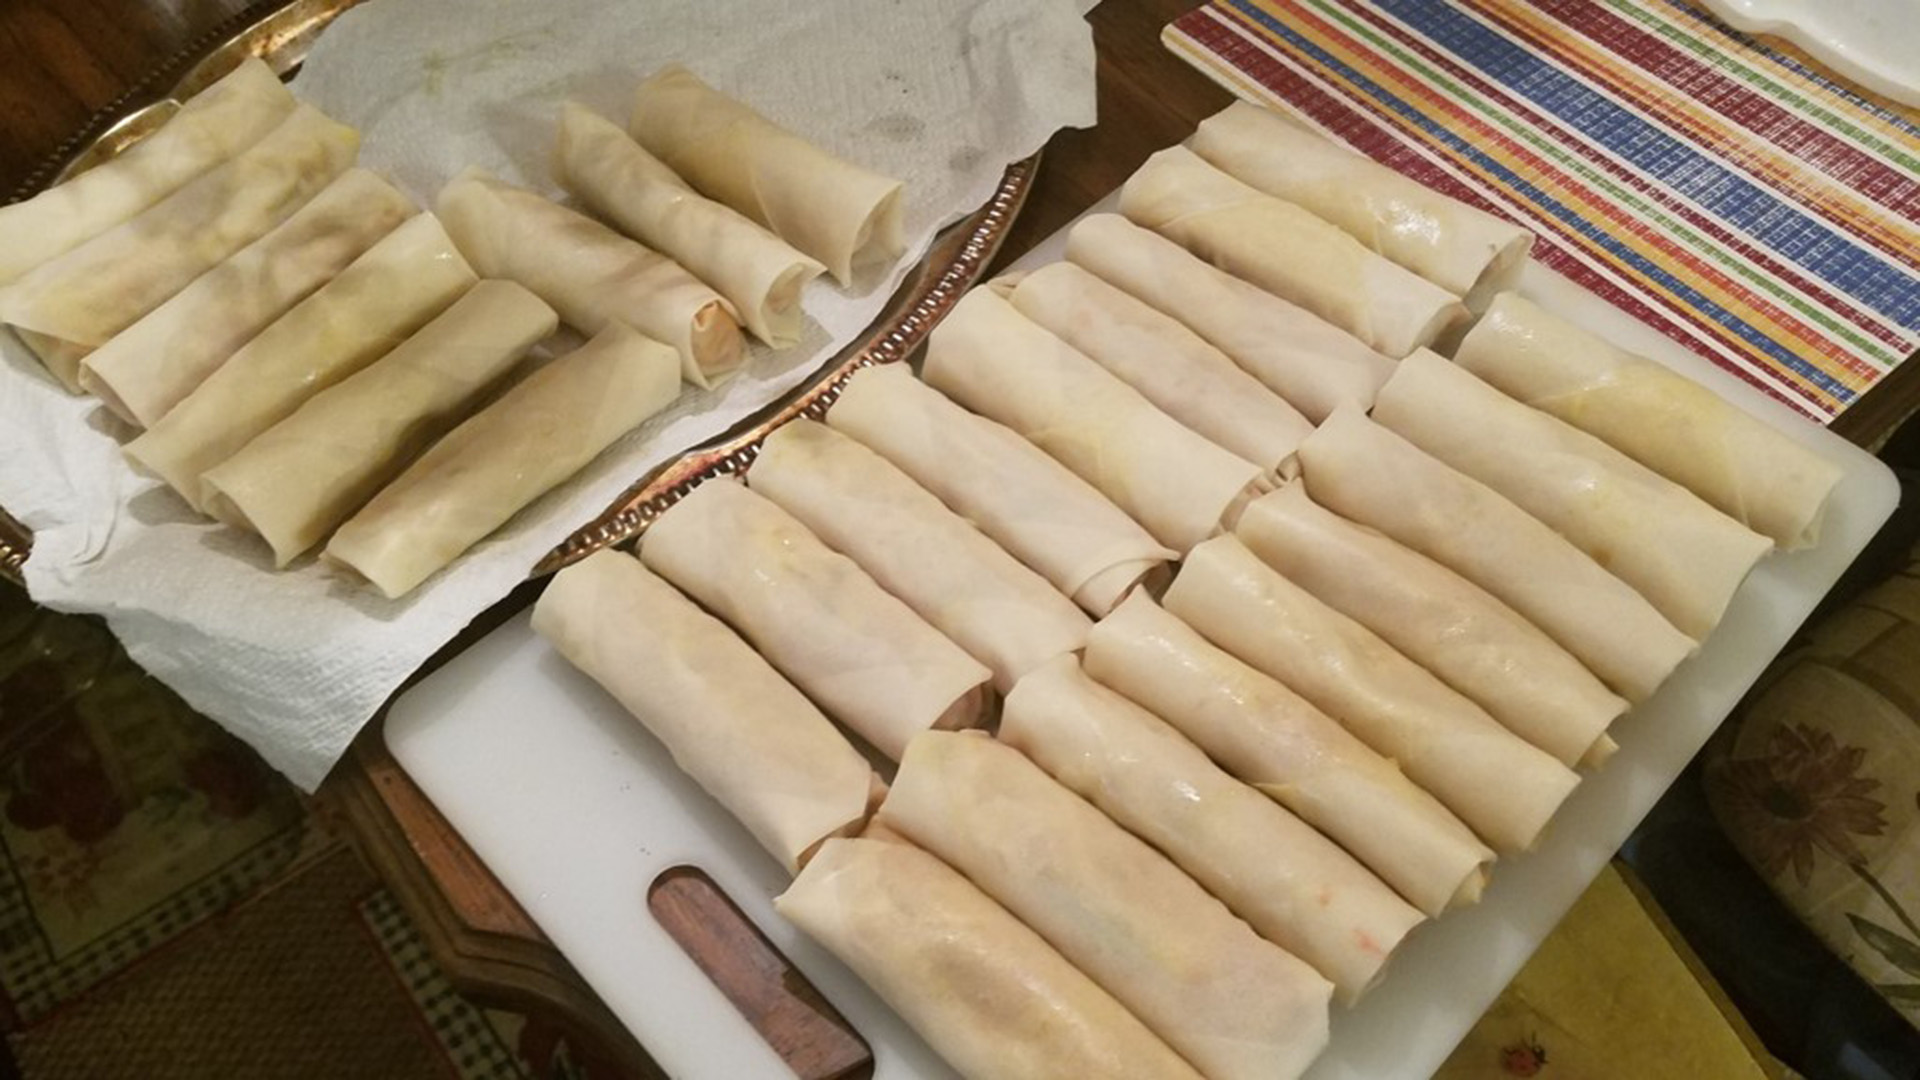 Fork The System - Vietnamese spring rolls - by Kim O'Connell [DON'T USE]